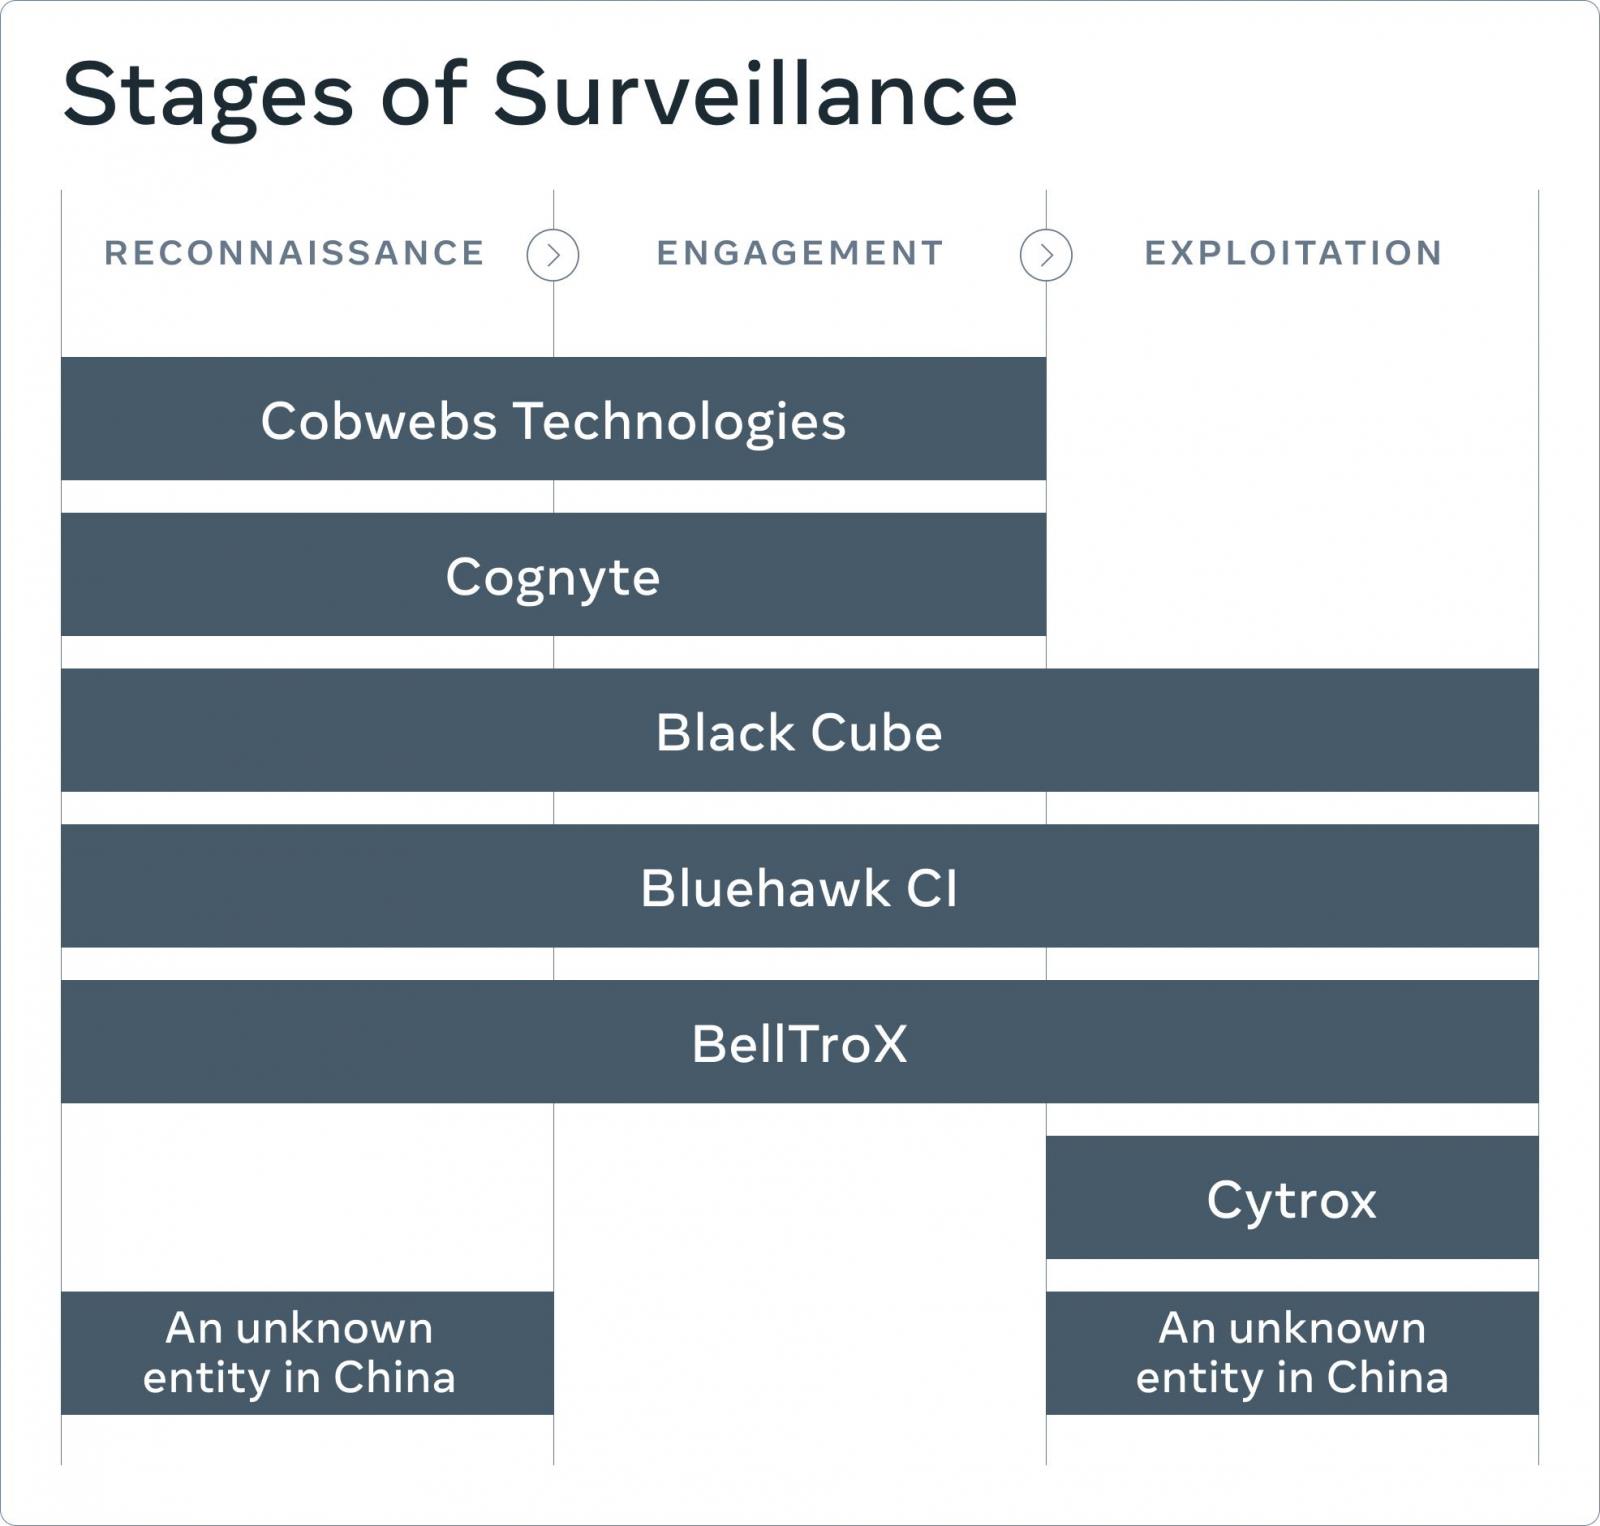 Stages of Surveillance